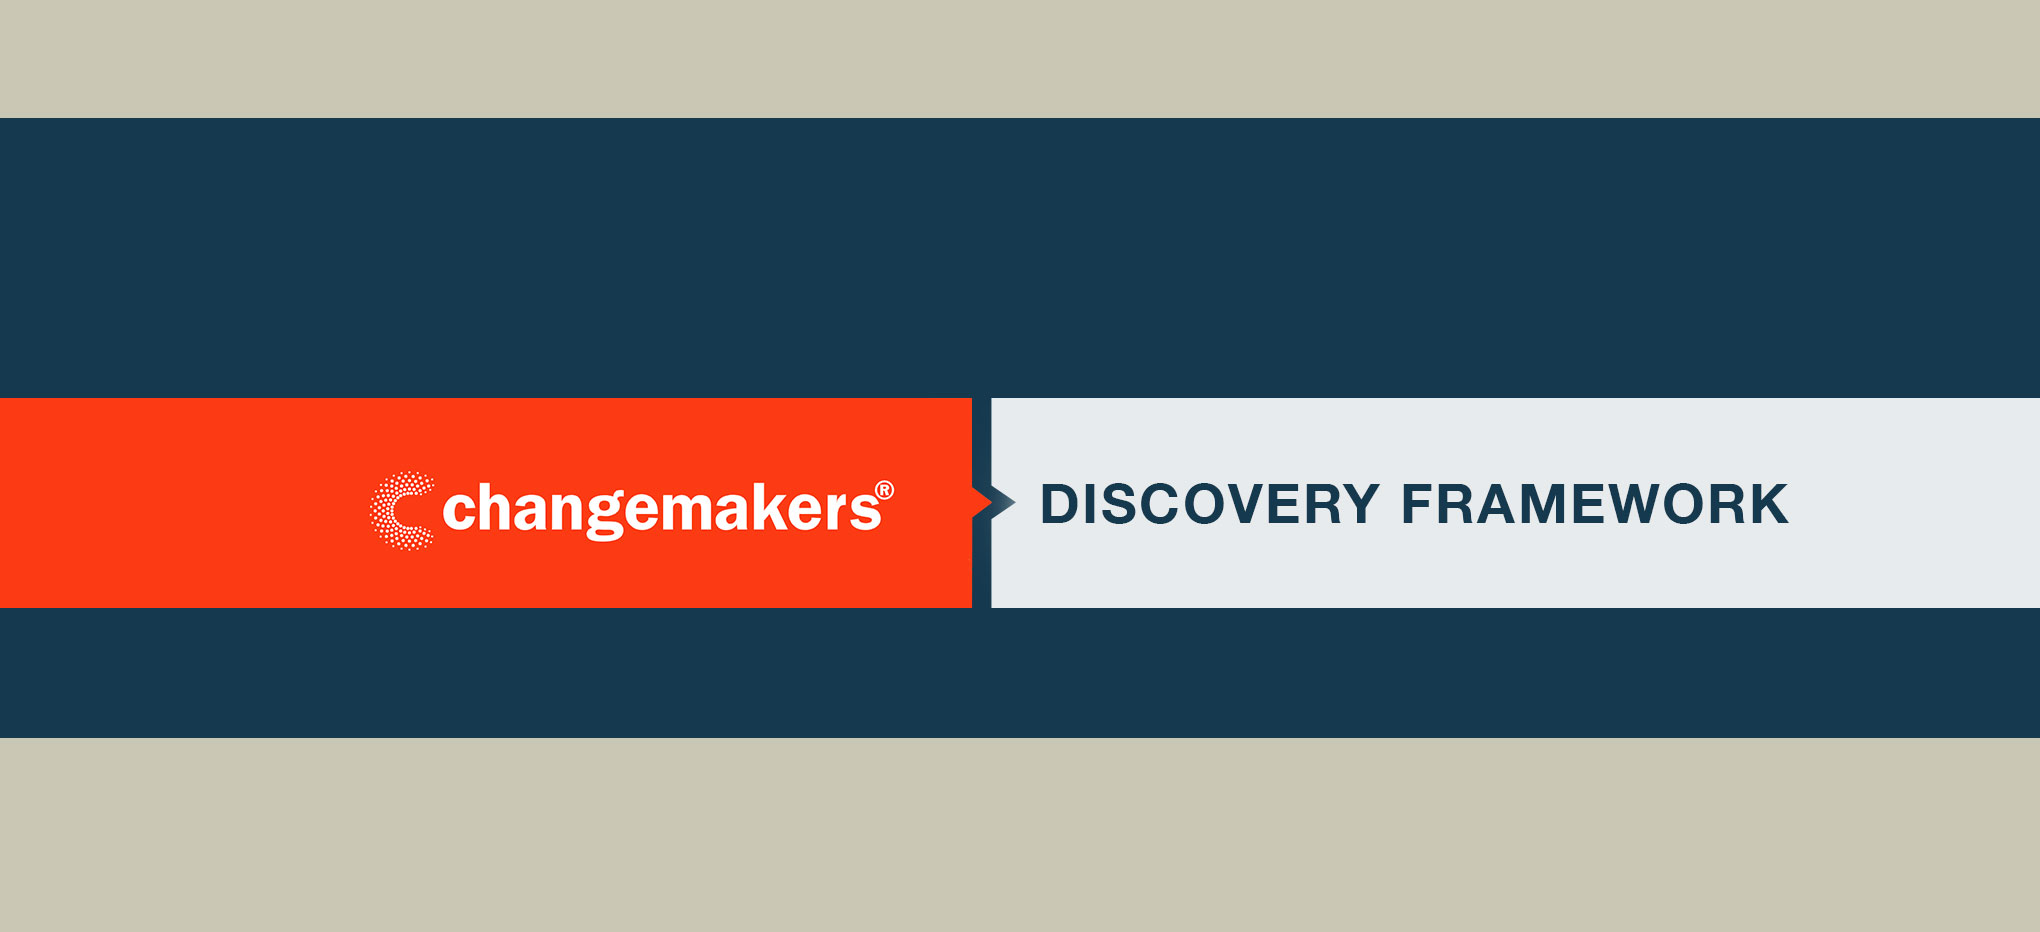 A web banner with blocks of color. A center block of color spans from left to right in dark blue. Breaking up the blue color block is two smaller blocks, in line with the each other with a small gap between them. The left block is red-orange with the Ashoka Changemakers logo in white. The right block is a cool grey with the words Discovery Framework. The left block has a small arrow that cuts into the right block.